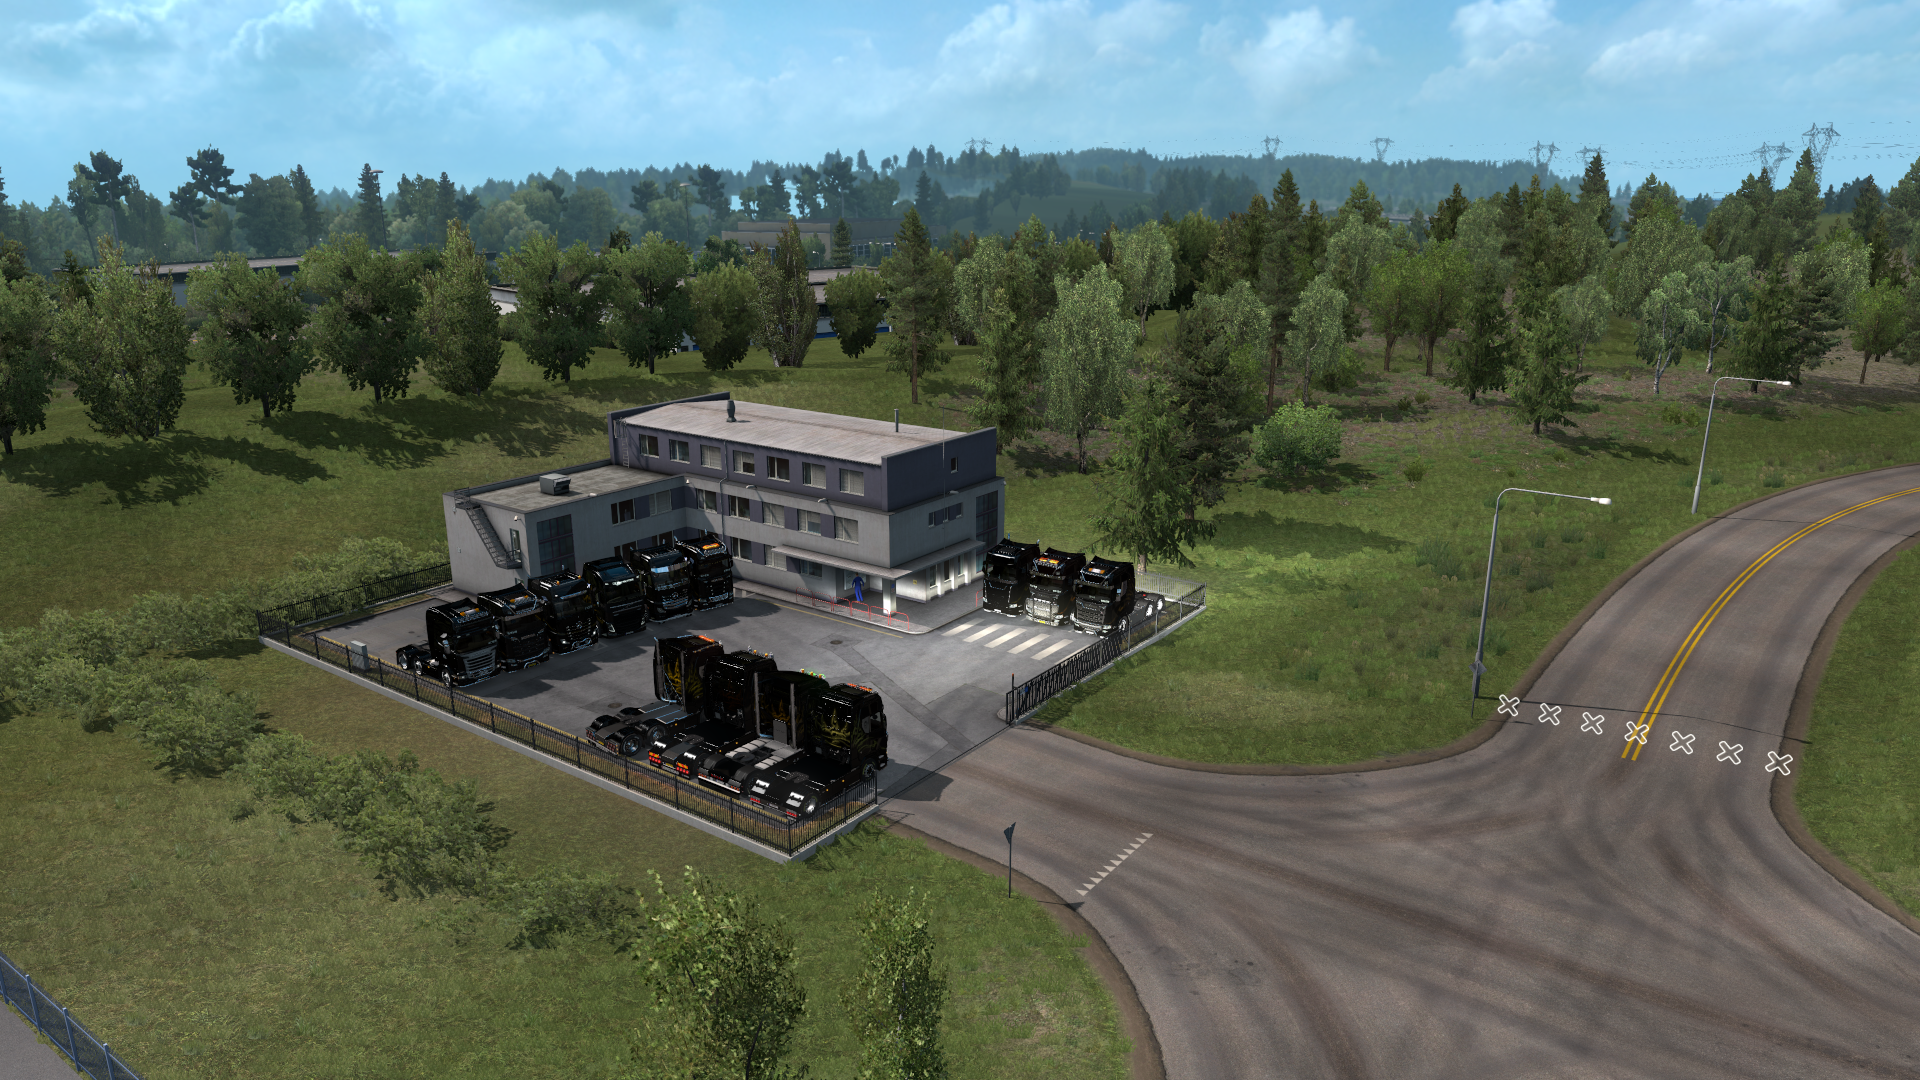 ets2_20200426_012600_00.png